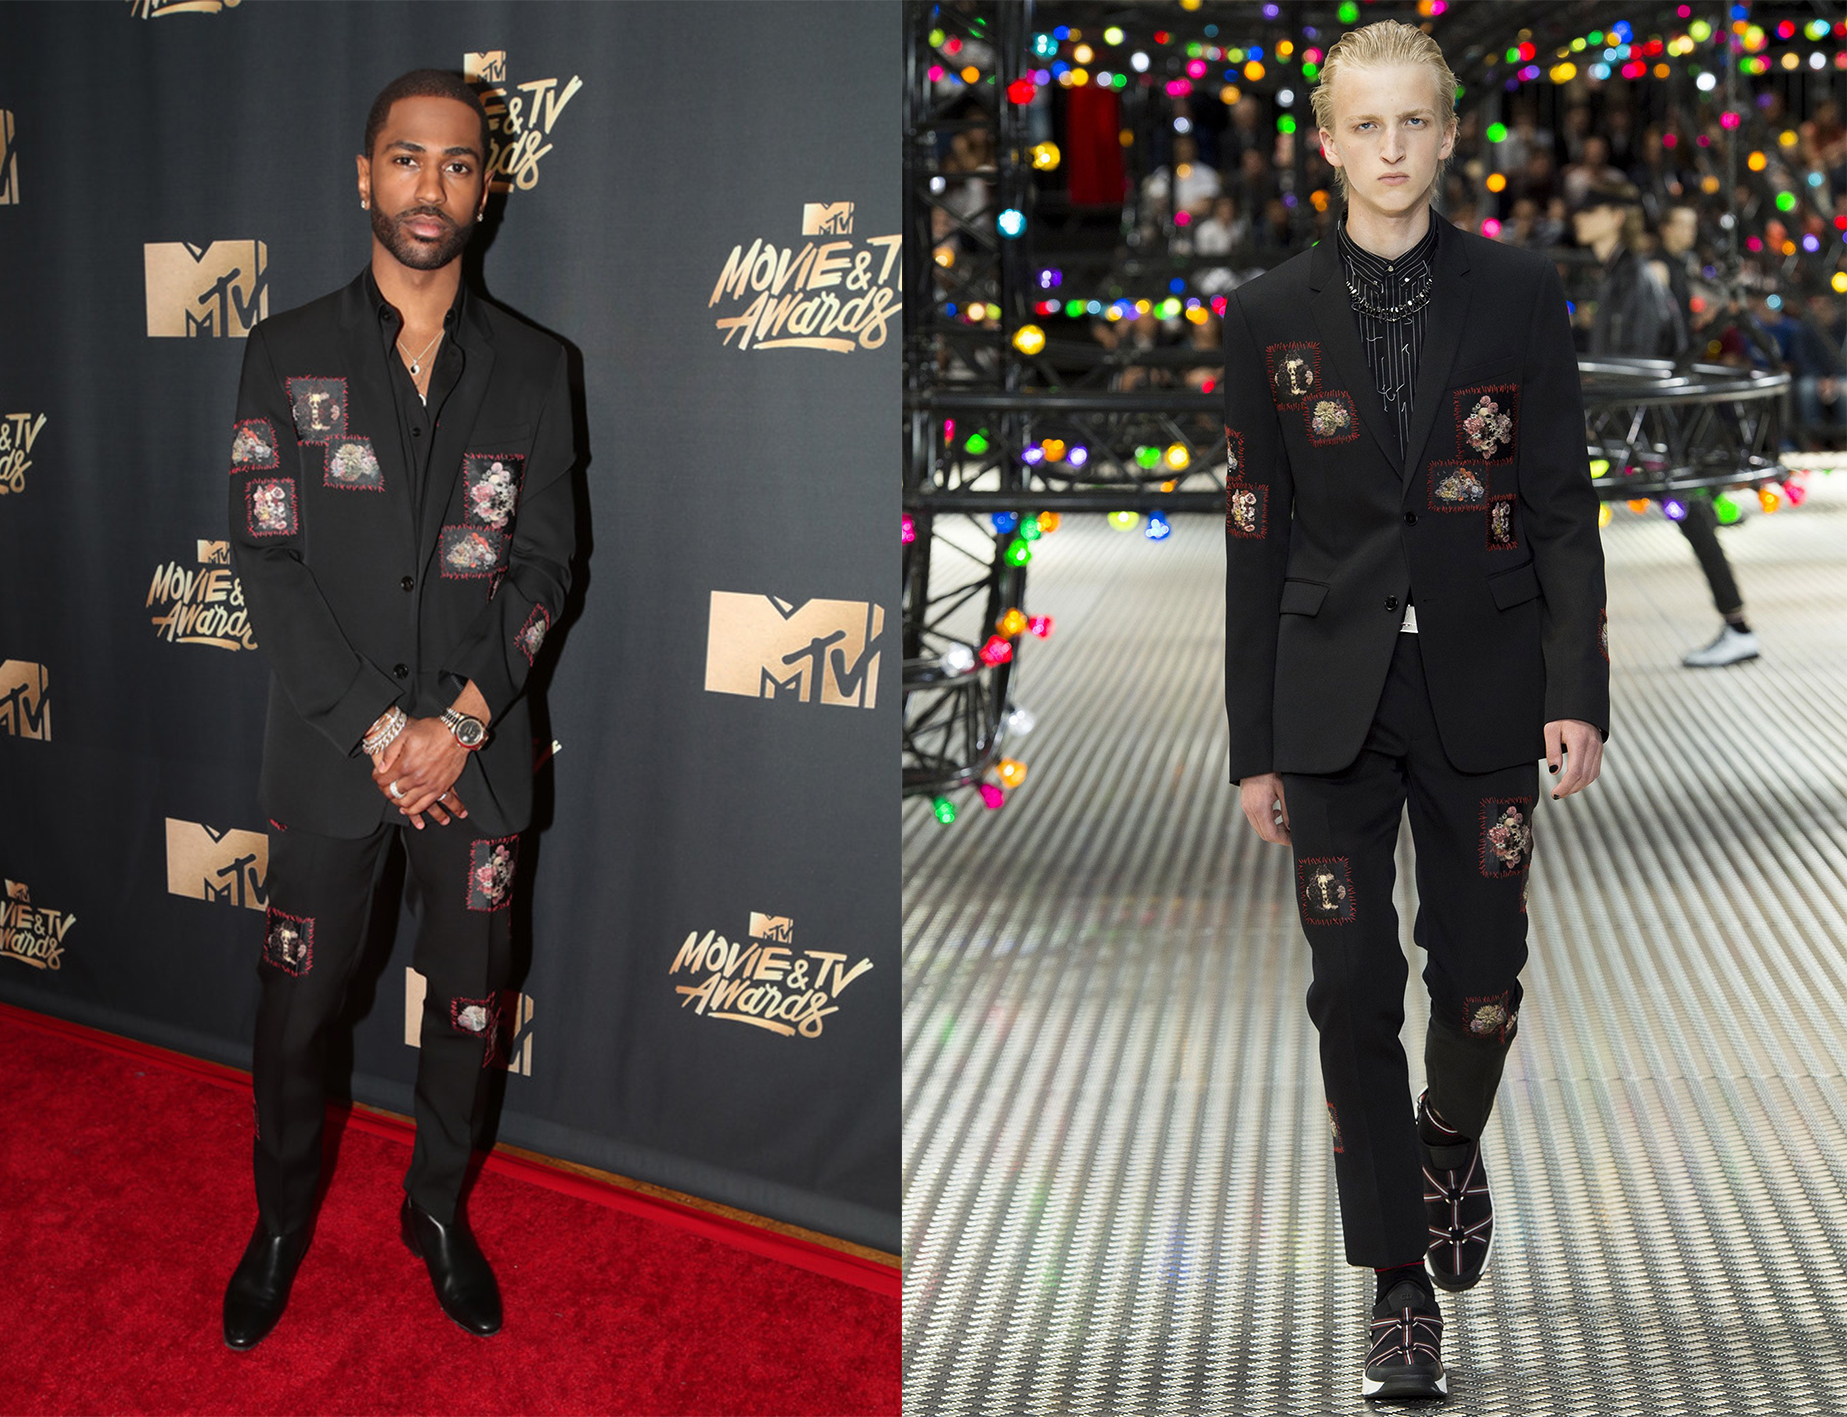 SPOTTED: Big Sean in Dior Homme at MTV Movie & TV Awards